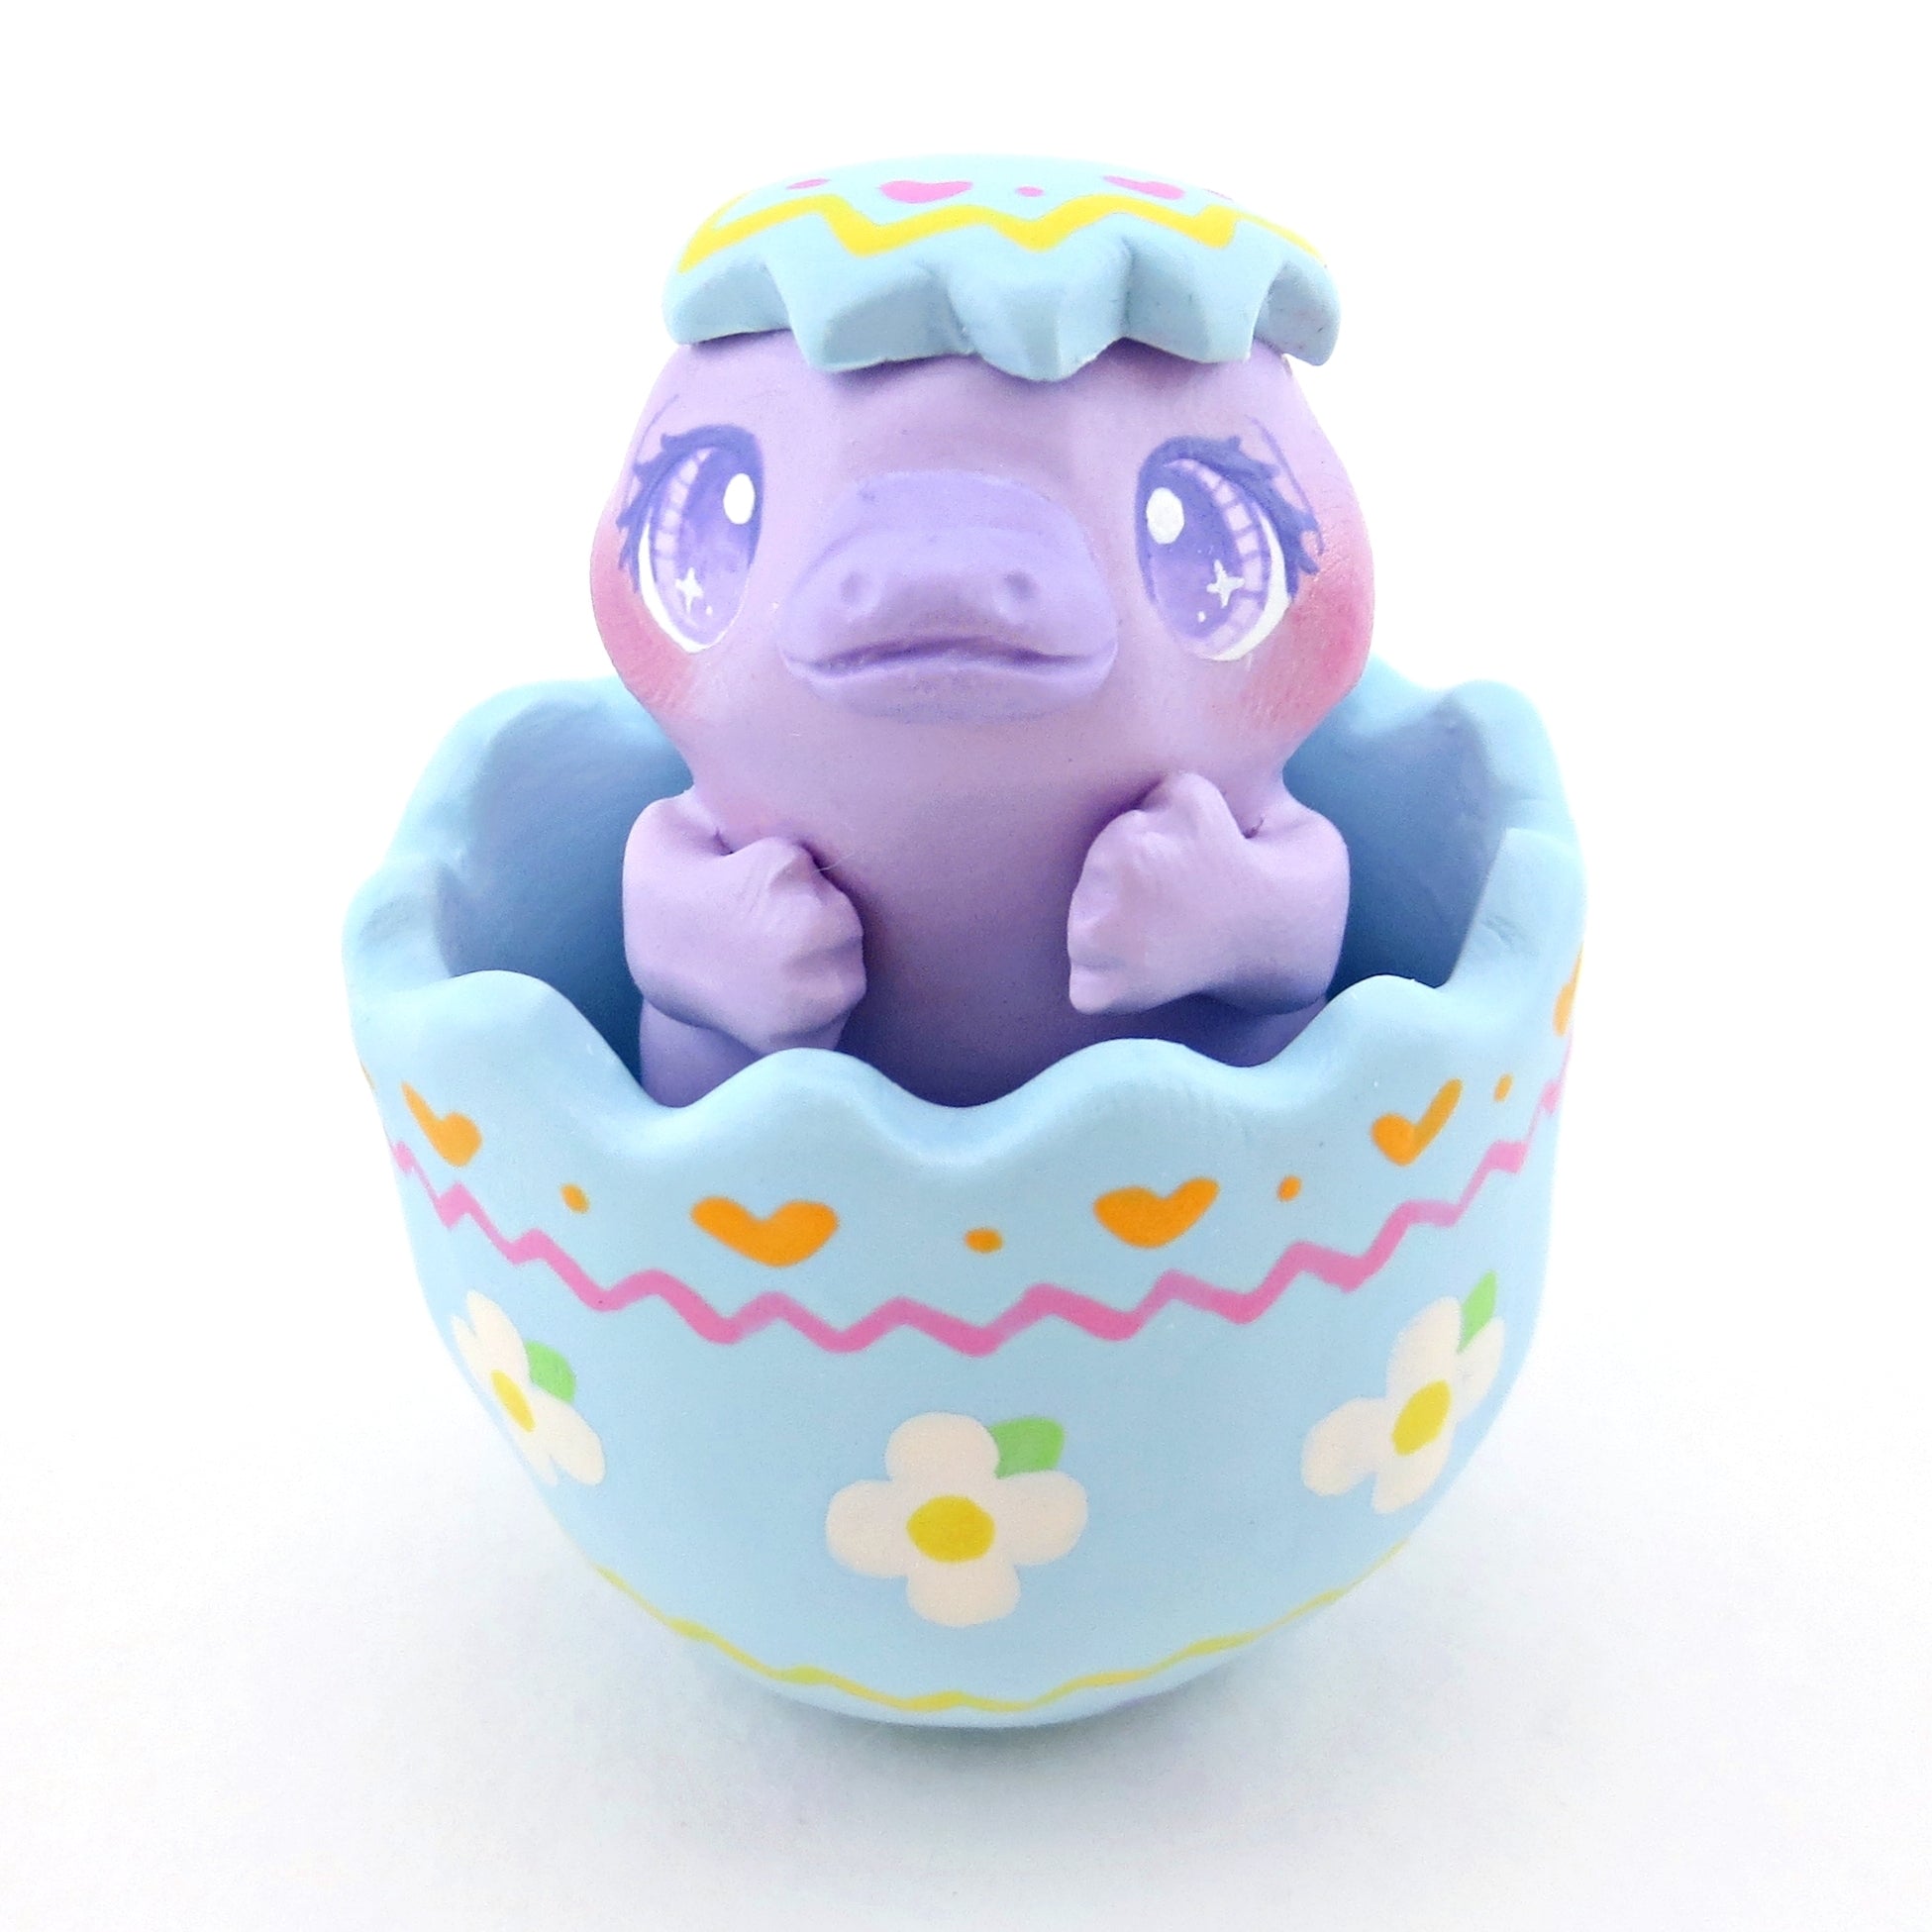 Purple Platypus in a Blue Easter Egg Figurine - Polymer Clay Easter Animal Collection